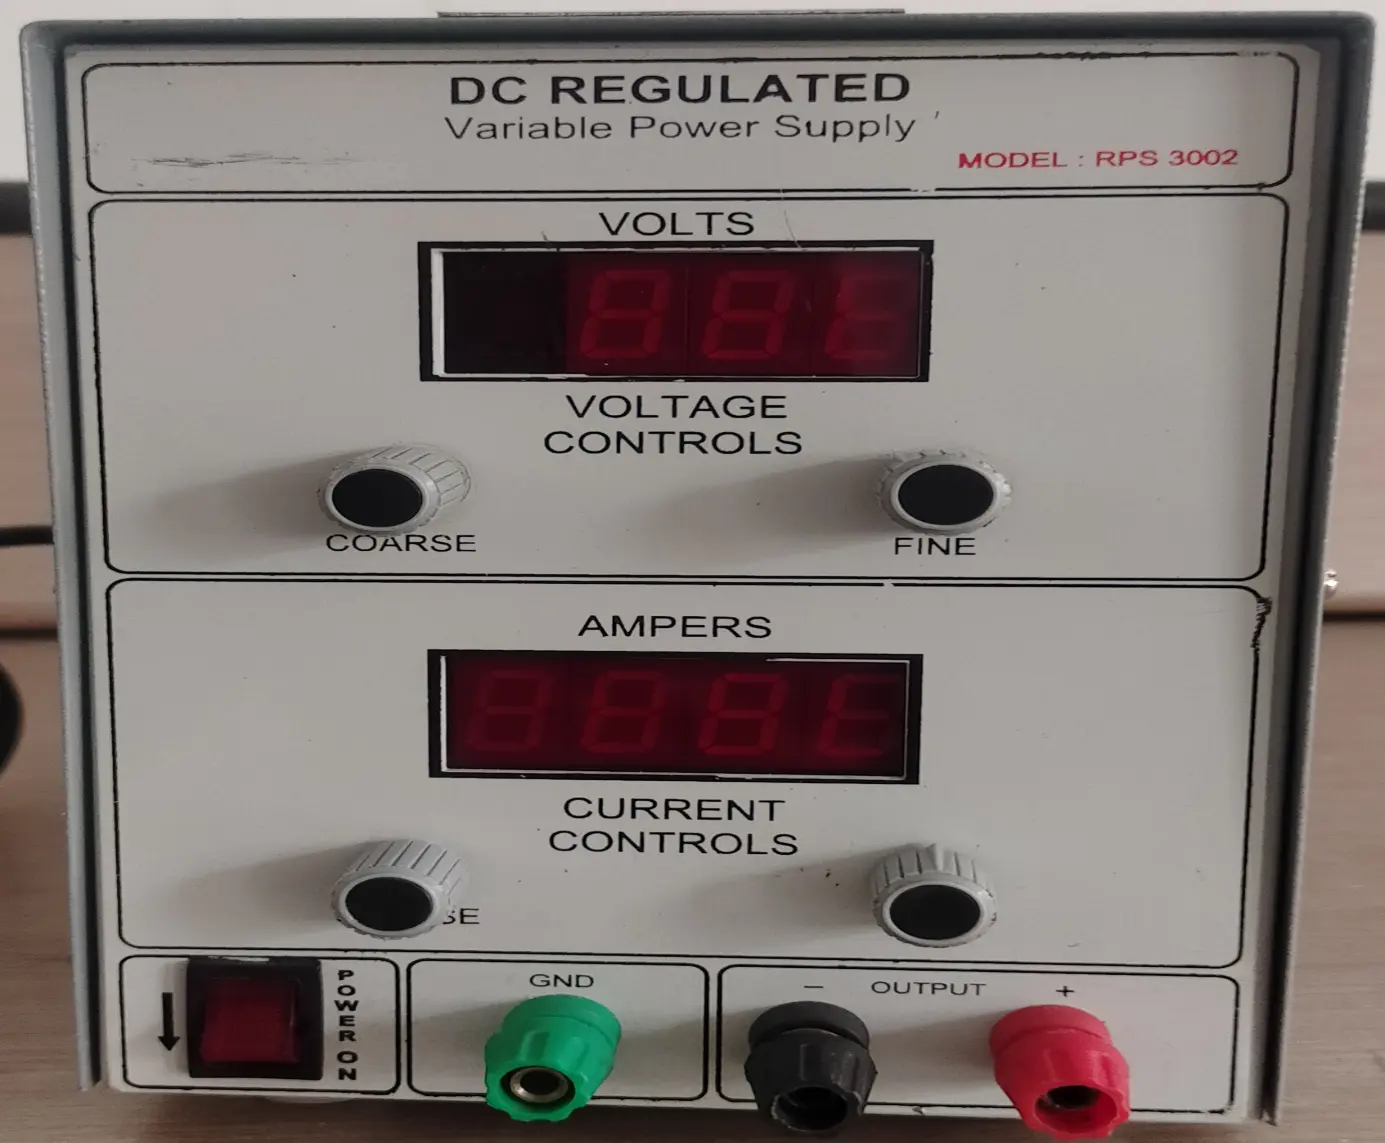 Regulated Power Supply (RPS)